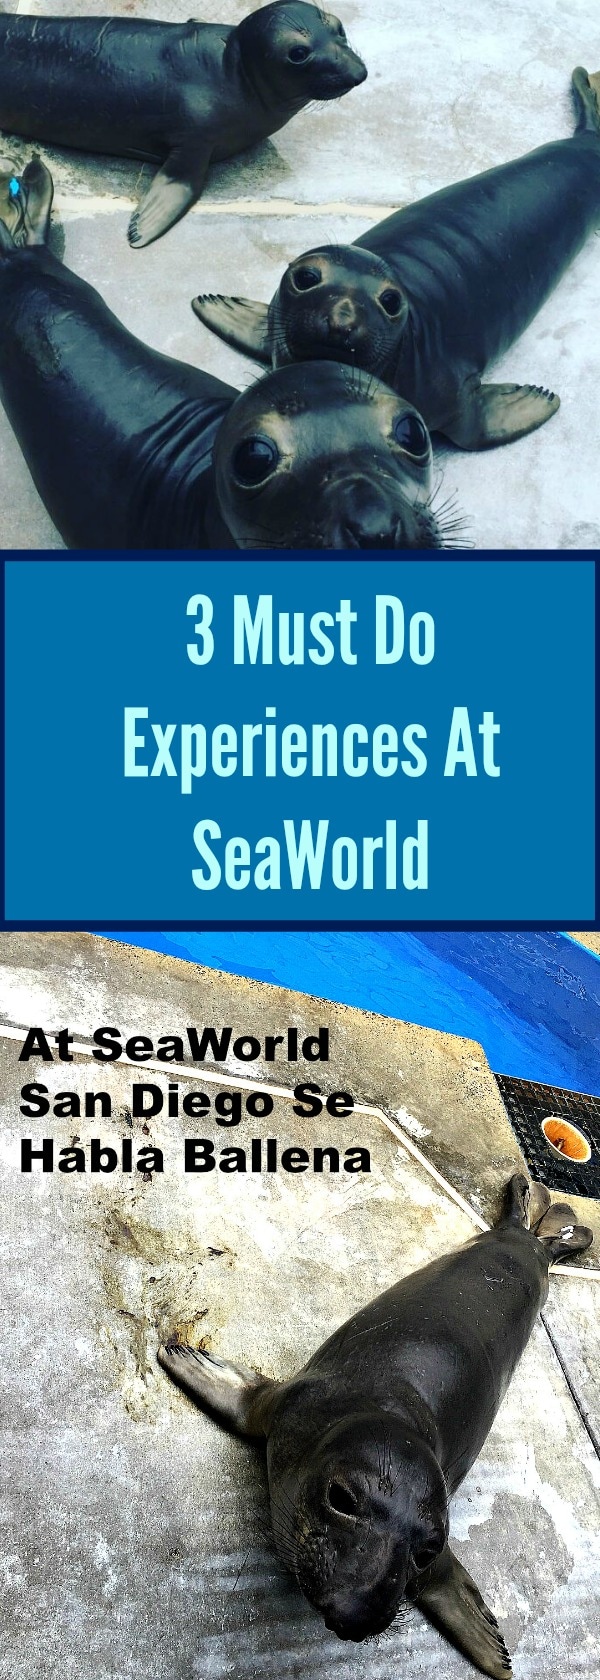 3 must do experiences at SeaWorld